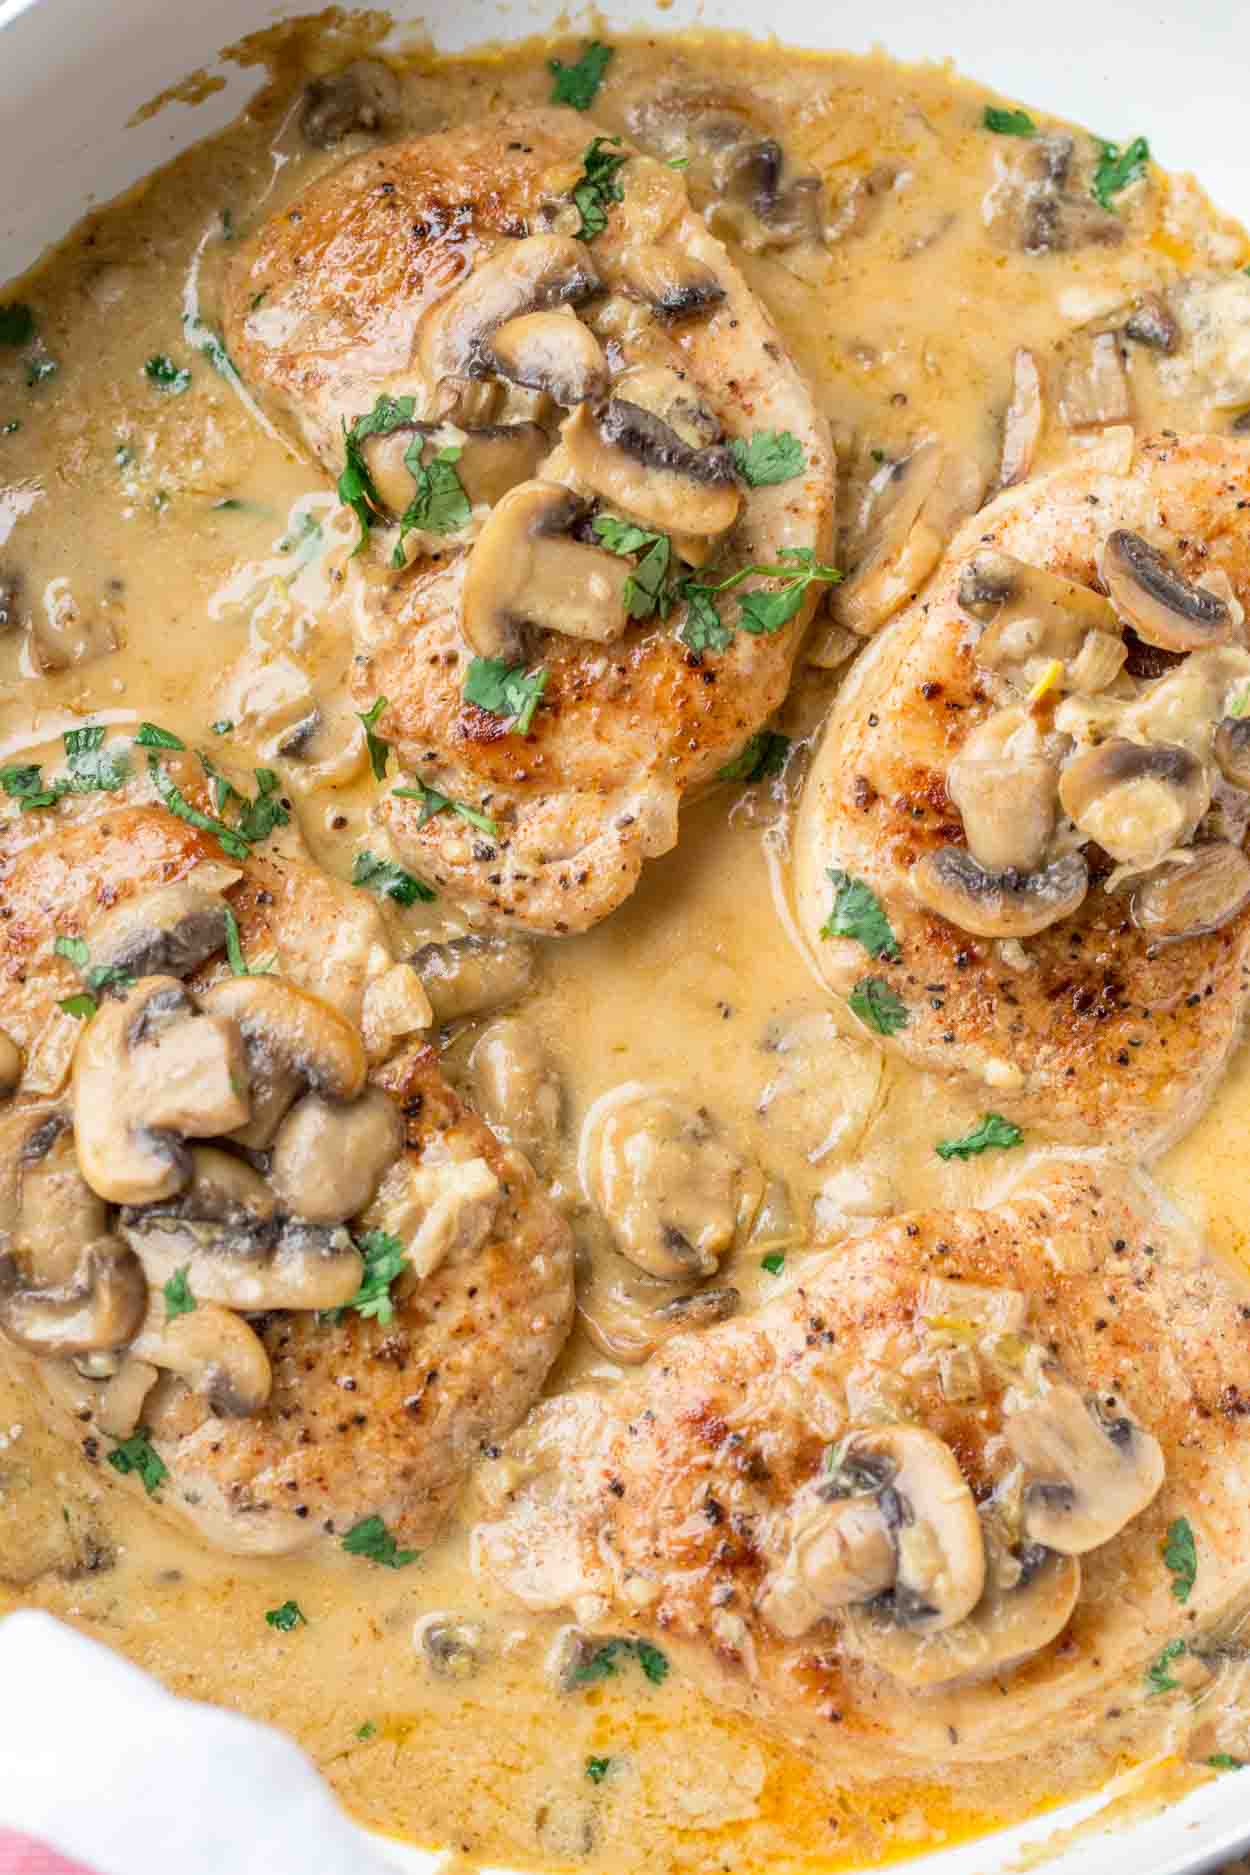 Pork chops in a skillet with a creamy mushroom sauce topped with fresh greens.